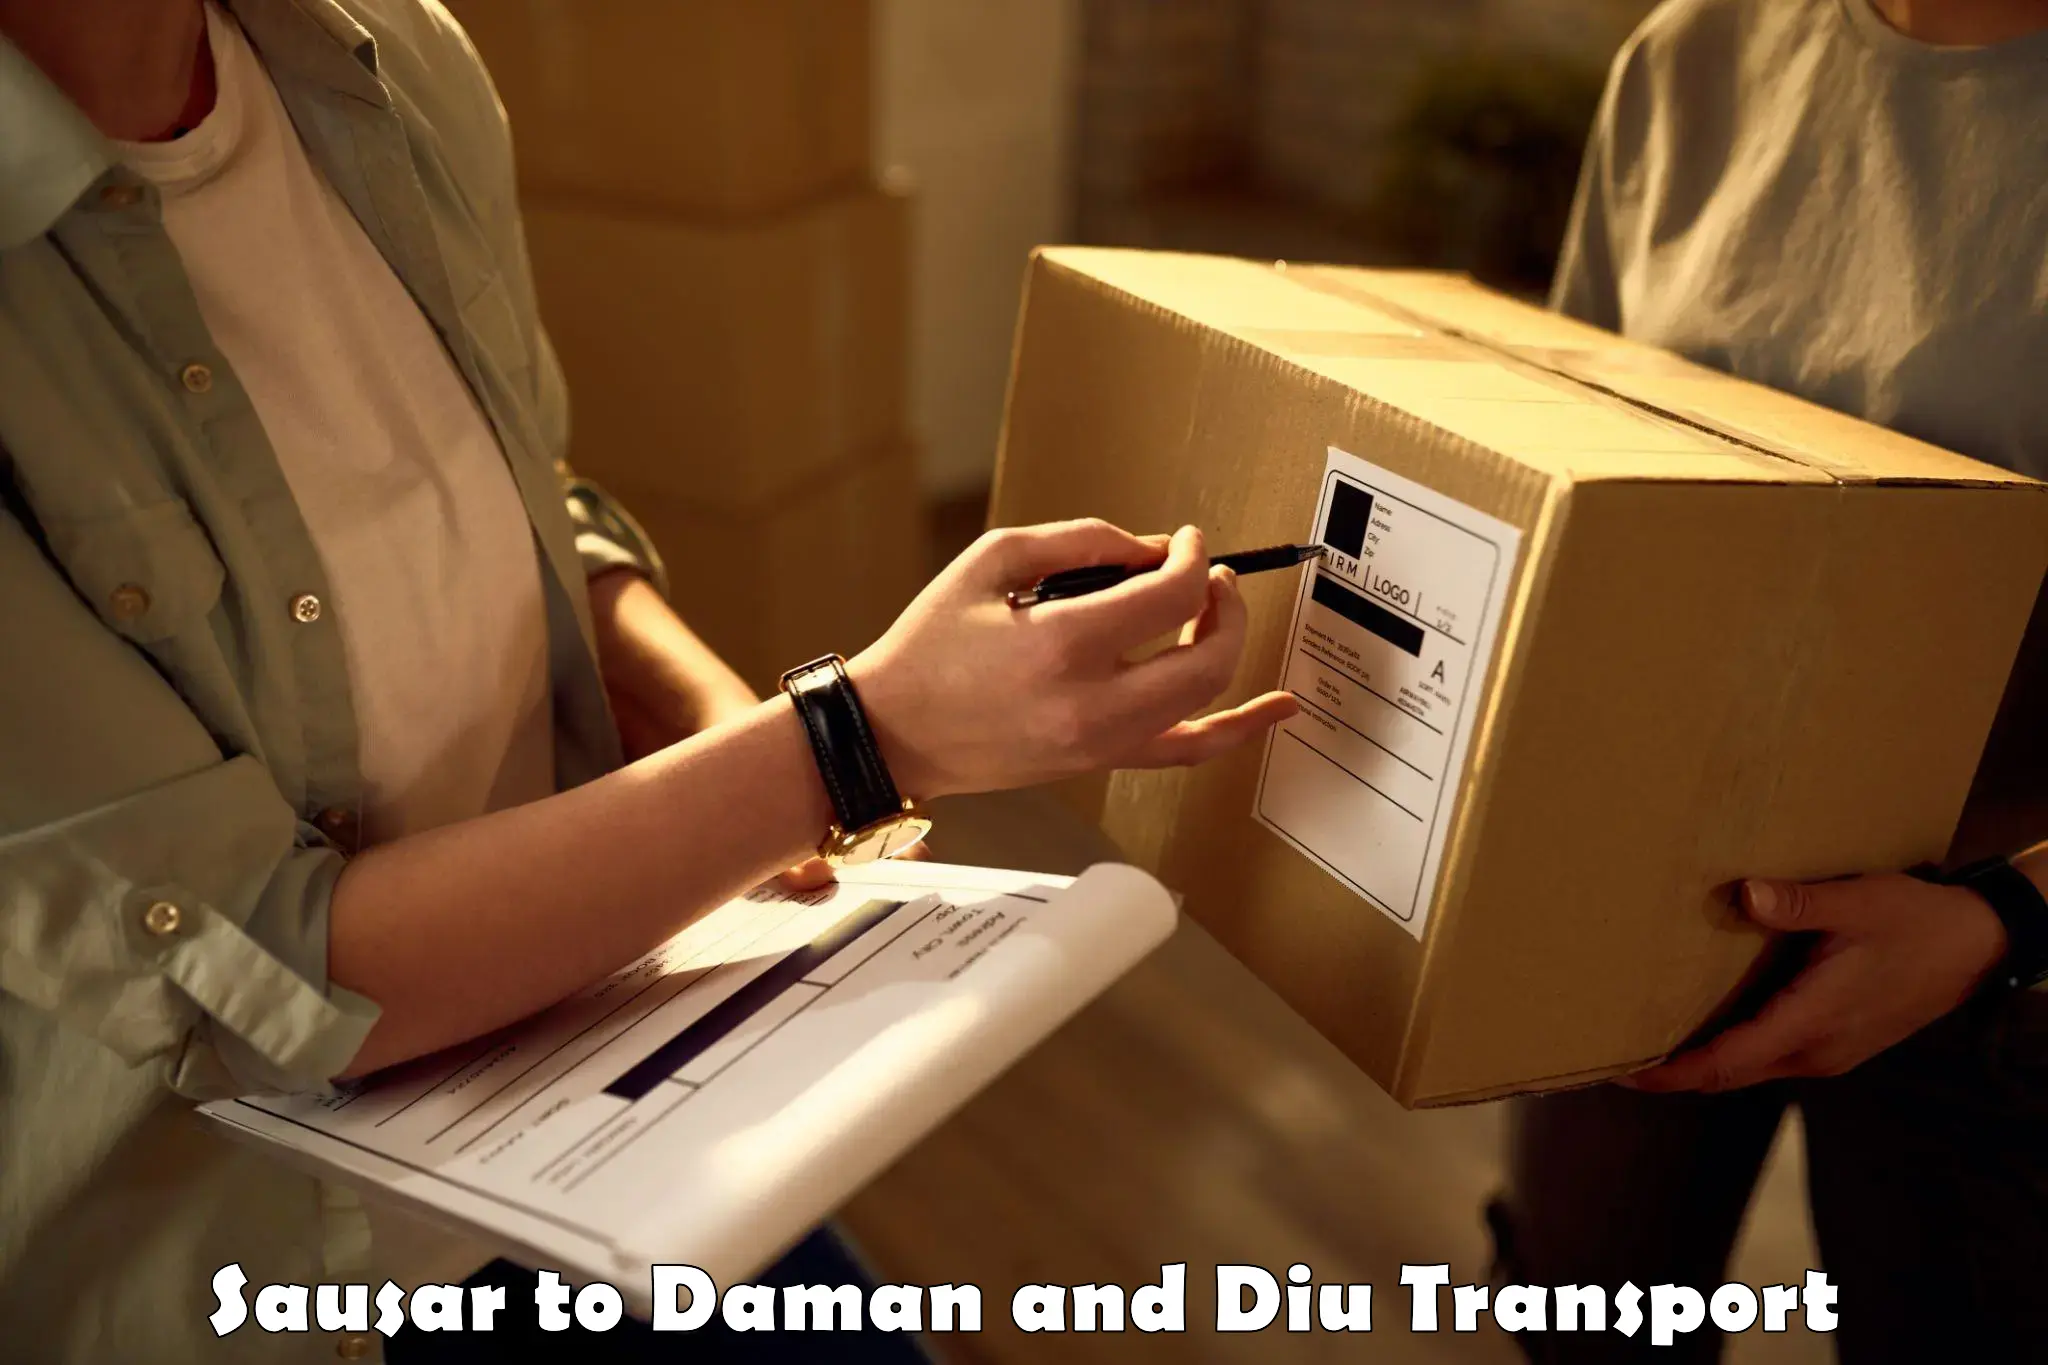 Delivery service Sausar to Daman and Diu